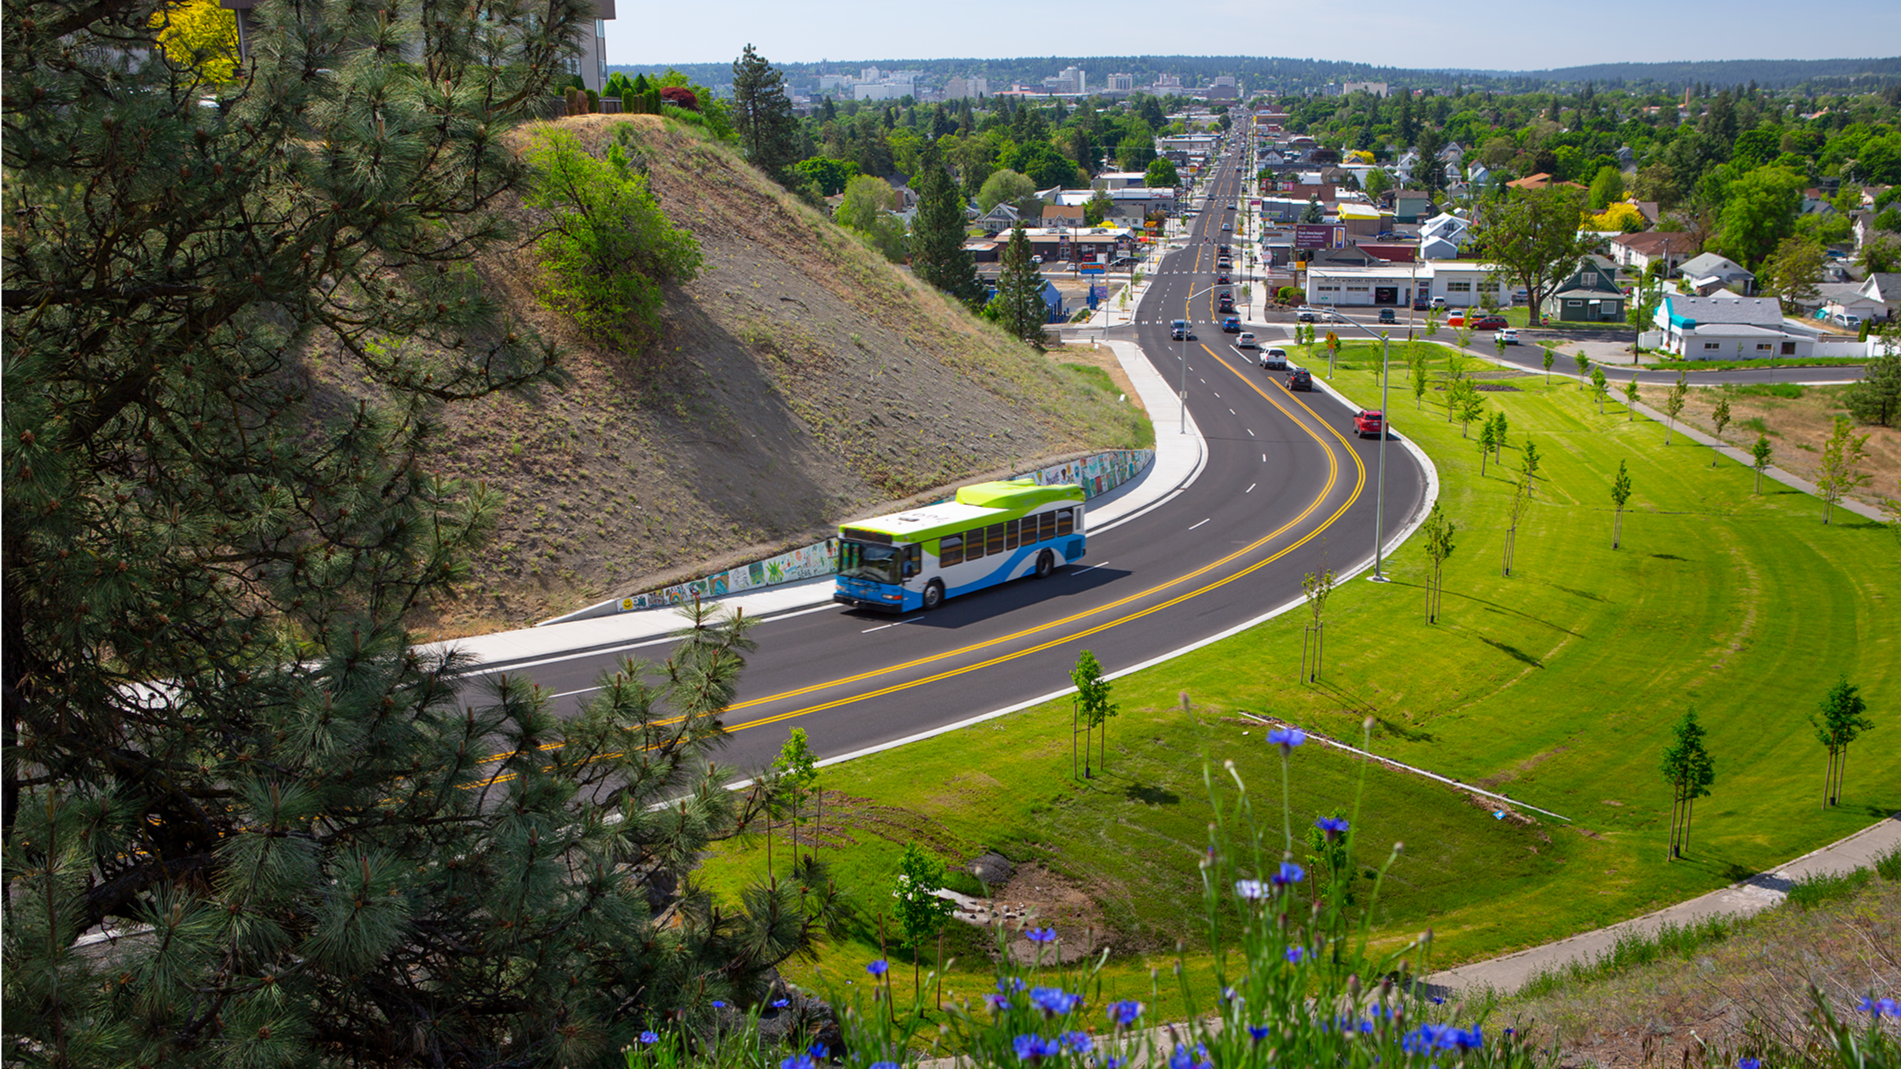 Aerial view of a city road with a Spokane Transit bus traveling, surrounded by lush greenery and a hill, with houses and trees in the background under a clear sky.